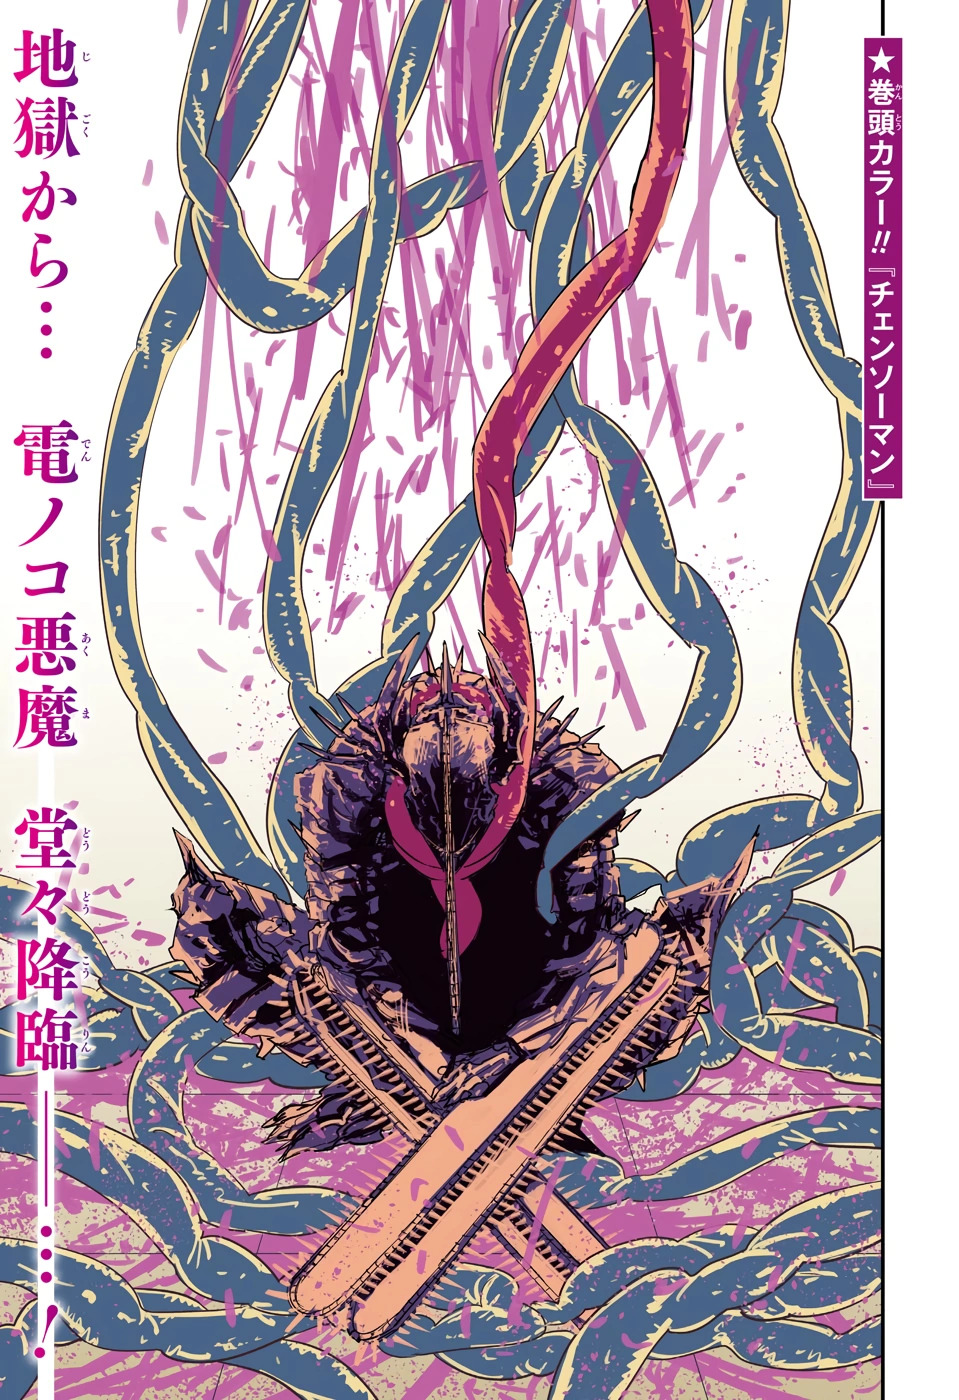 Chainsaw Man Part 2 Manga Release Date Revealed - Fossbytes